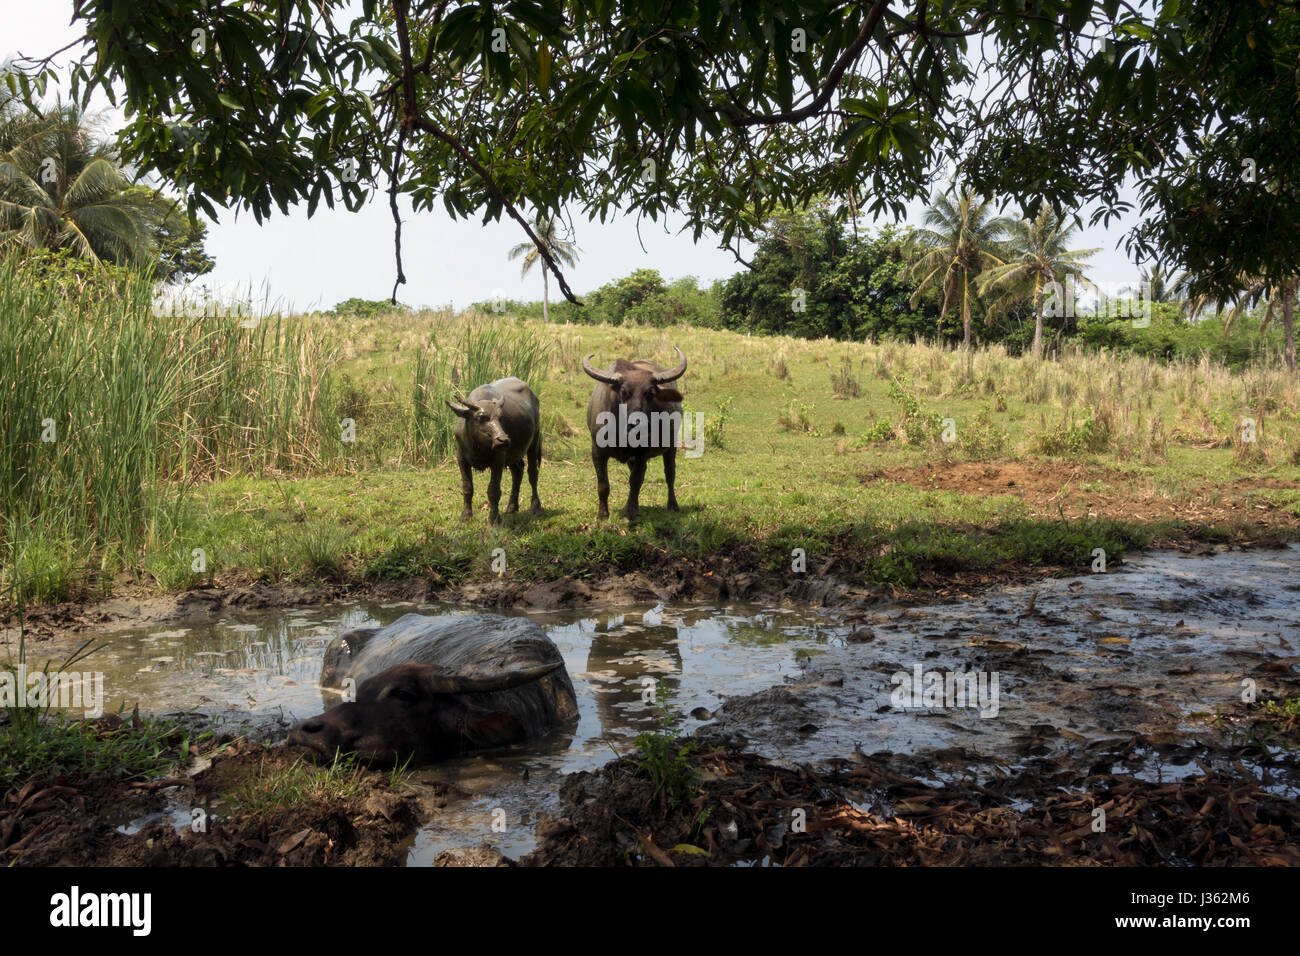 Polillo Island, Philippines - April 30, 2017: Carabaos resting under the shade on the Pandanan Island in the Philippines. Stock Photo